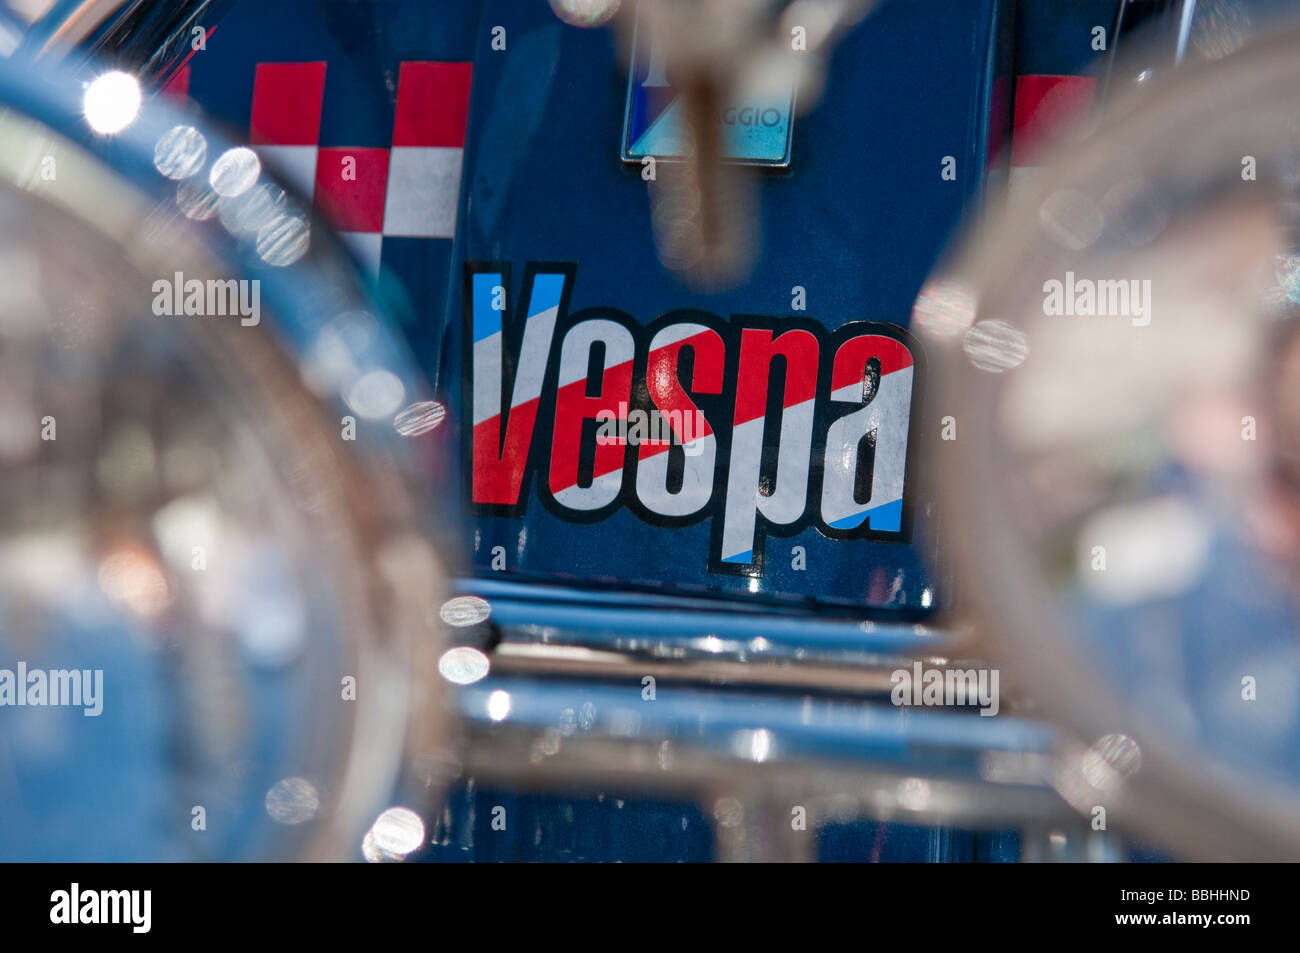 Red, white and blue Vespa logo behind chrome headlights Stock Photo